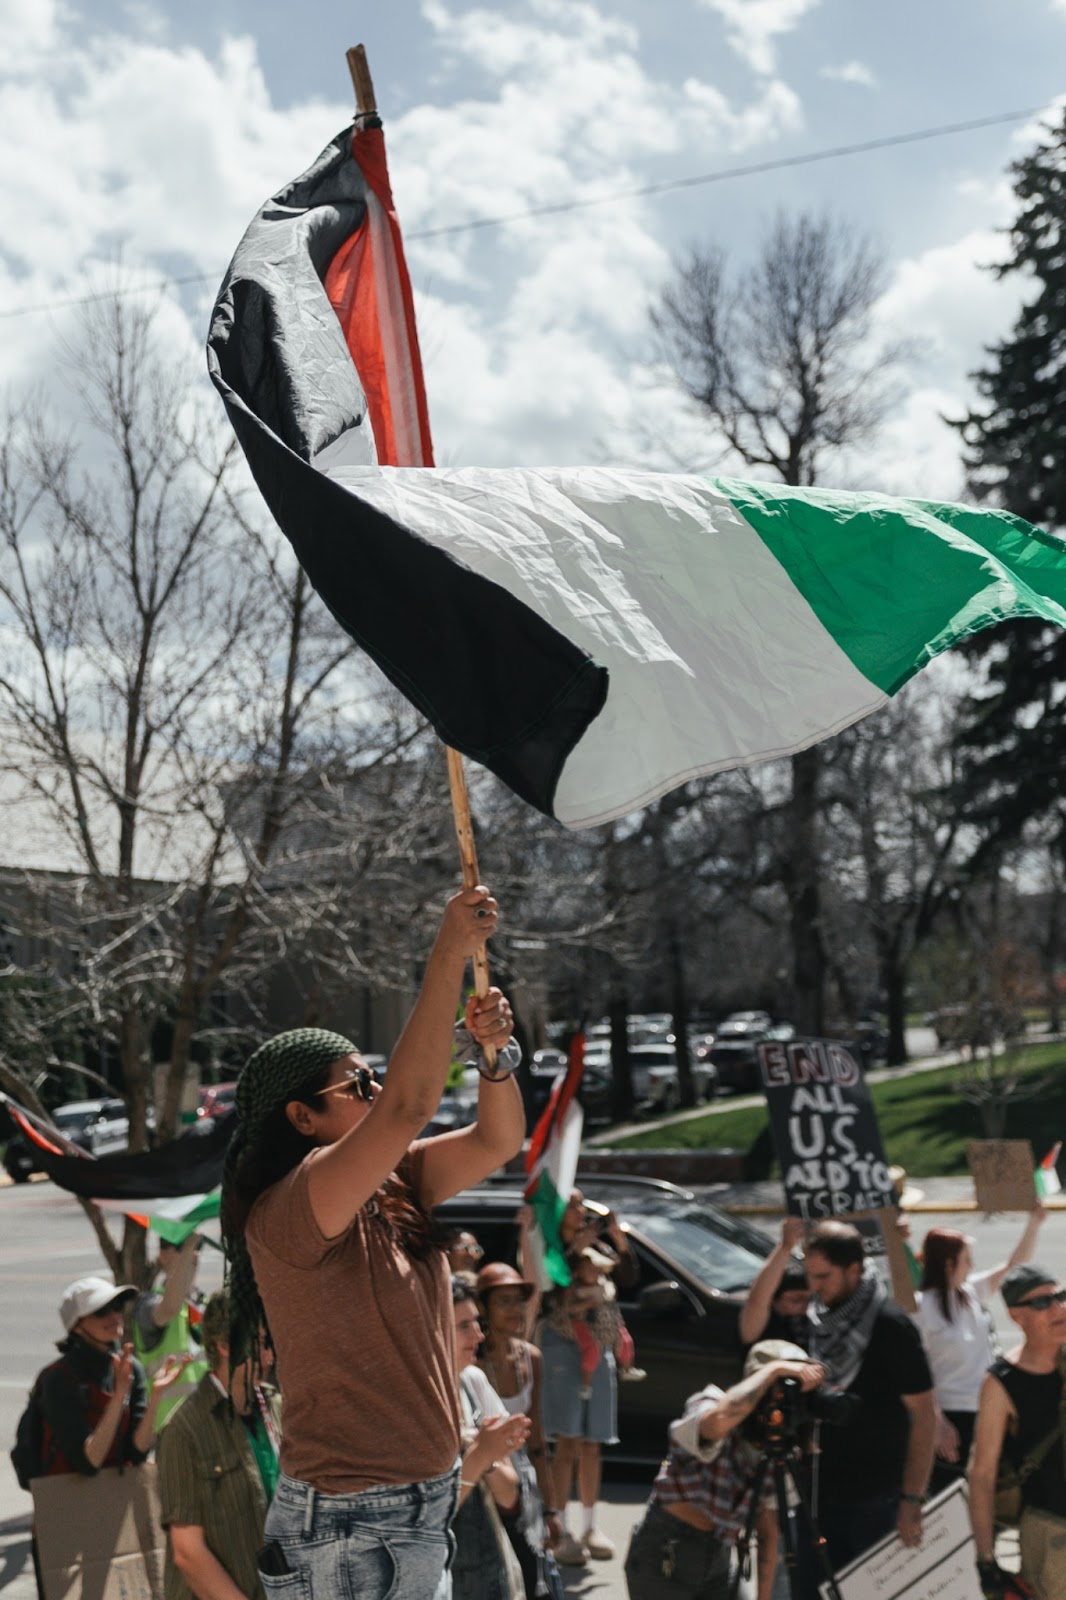 Color photograph of a person wearing a brown T-shirt and jeans waving a Palestinian flag in front of a small crowd. in the background, others also hold Palestinian flags